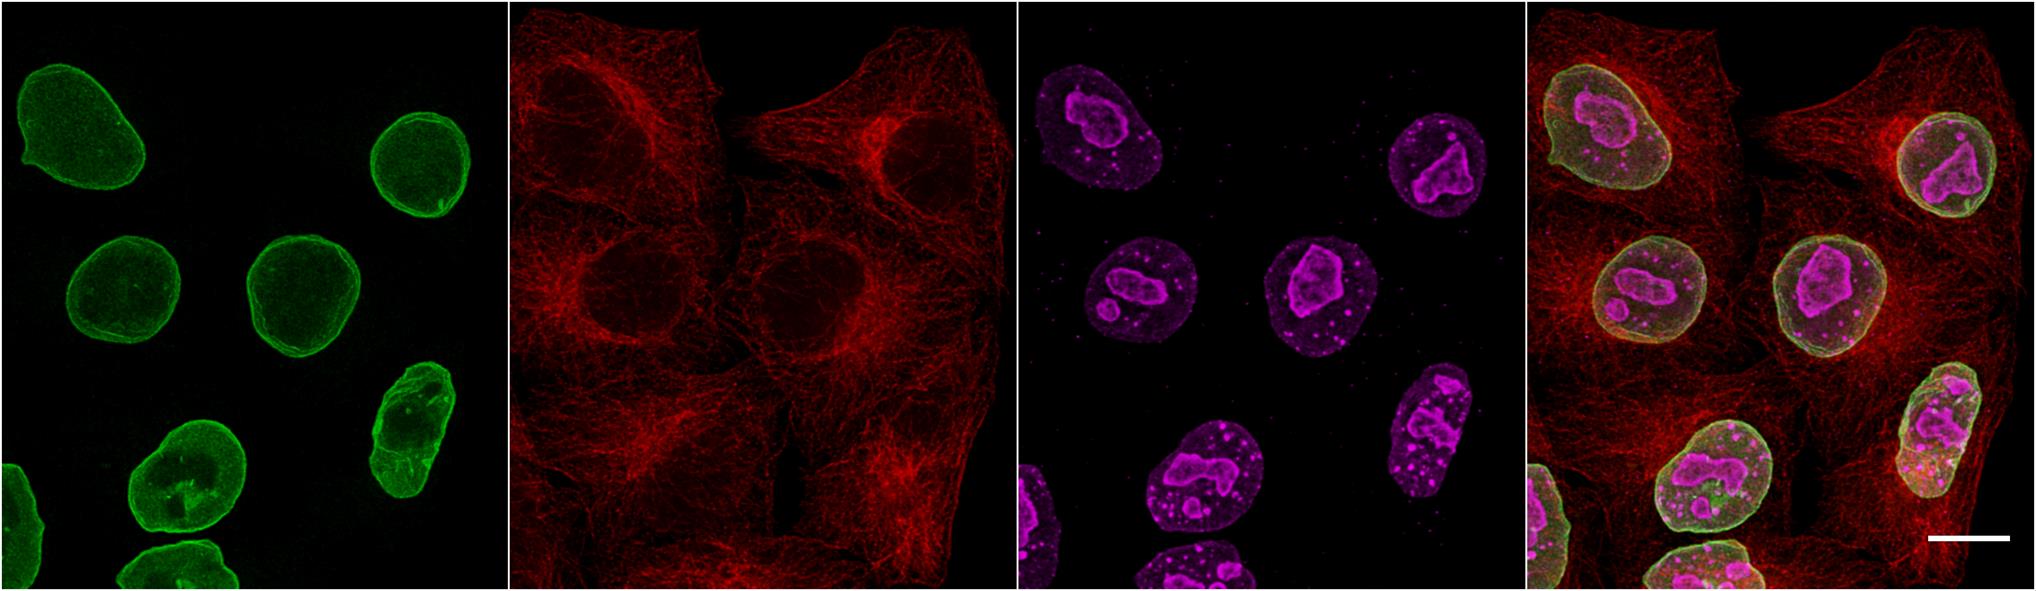 Multiplexed immunostaining of HeLa cells with two alpaca anti-mouse Nano-Secondaries and one conventional secondary antibody. Green: mouse IgG3 anti-Lamin + alpaca anti-mouse IgG3 VHH Alexa Fluor® 488. Red: mouse IgG1 anti-Tubulin + alpaca anti-mouse gG1 VHH Alexa Fluor® 568. Magenta: rabbit anti-Ki67 + conventional polyclonal secondary anti-rabbit-AF647. Scale bar, 10 μm. Images were recorded at the Core Facility Bioimaging at the Biomedical Center, LMU Munich.